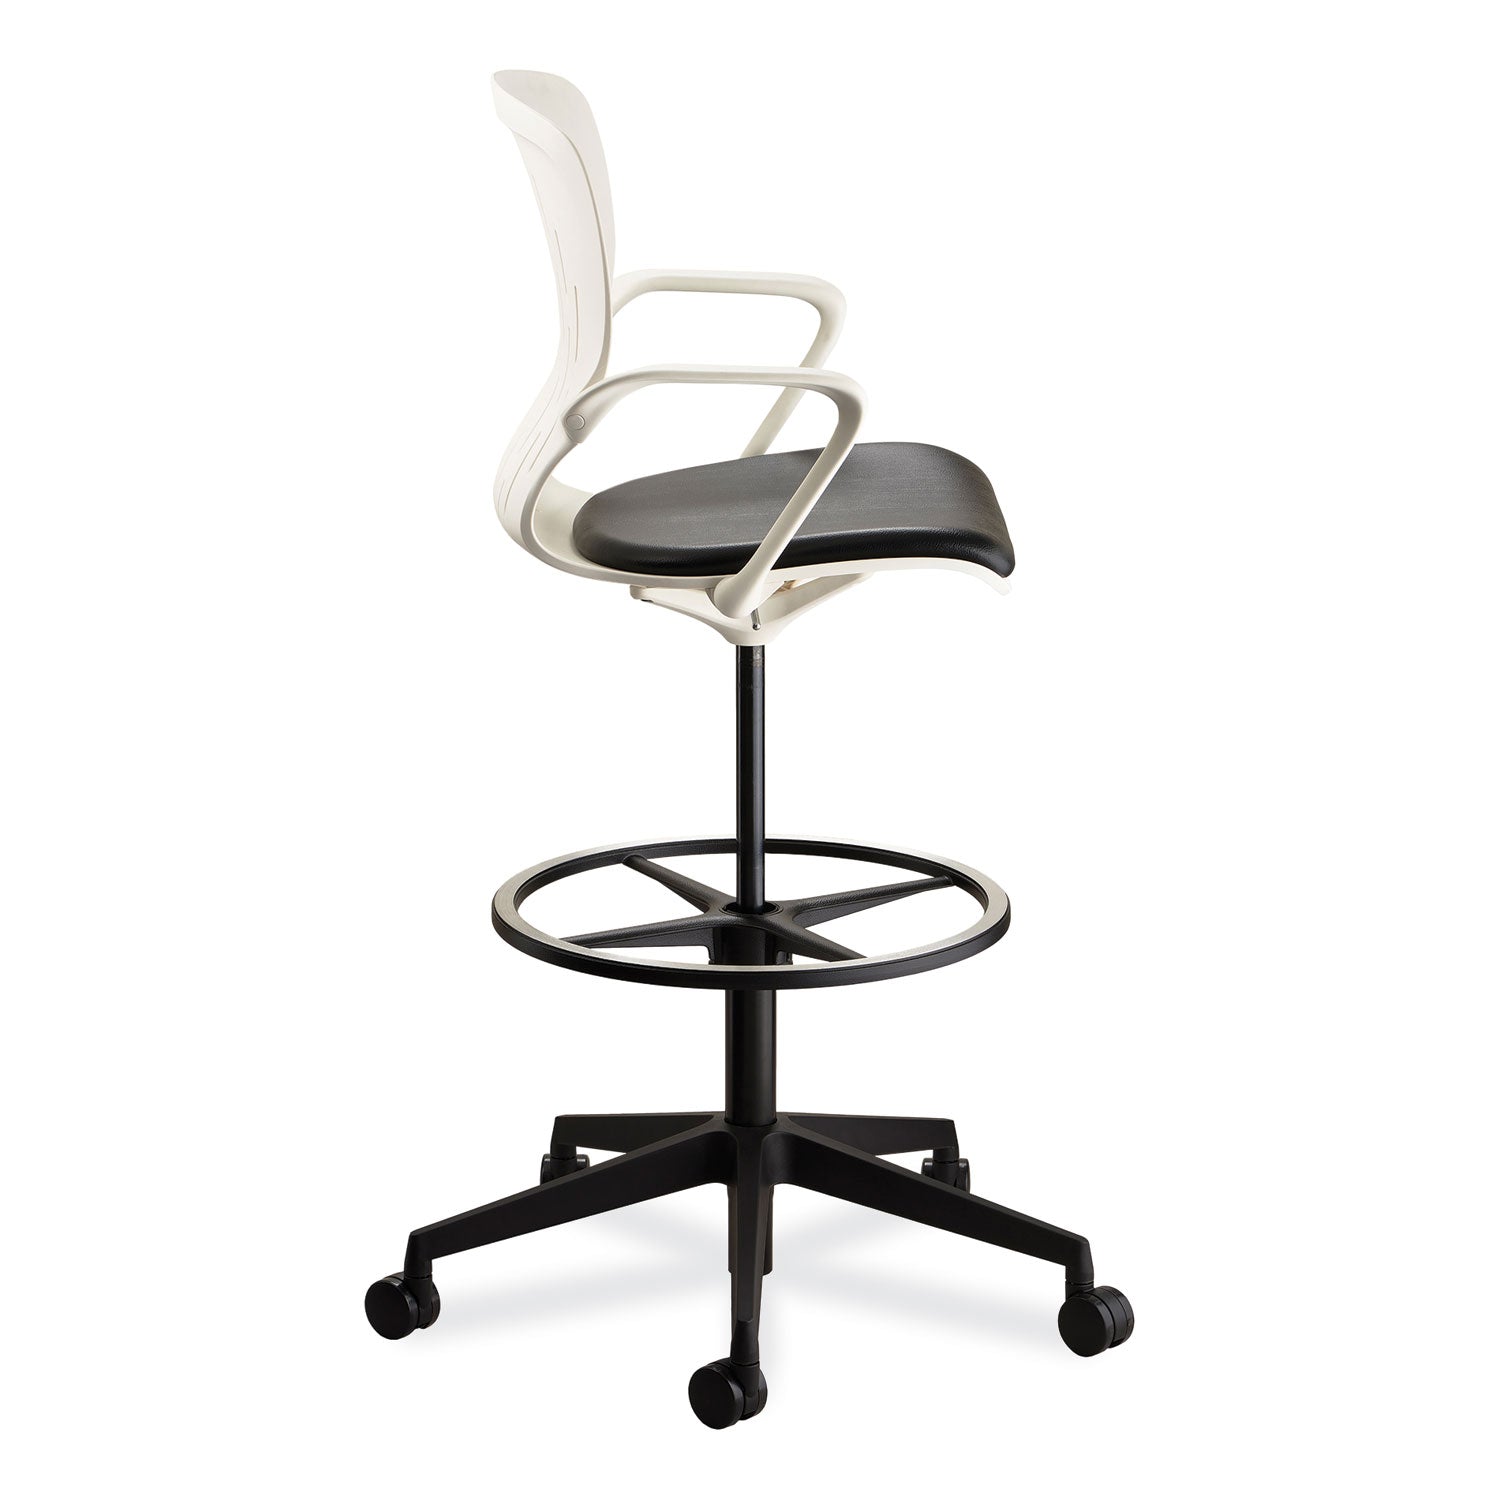 shell-extended-height-chair-max-275-lb-22-to-32-high-black-white-seat-white-back-black-base-ships-in-1-3-business-days_saf7014wh - 3